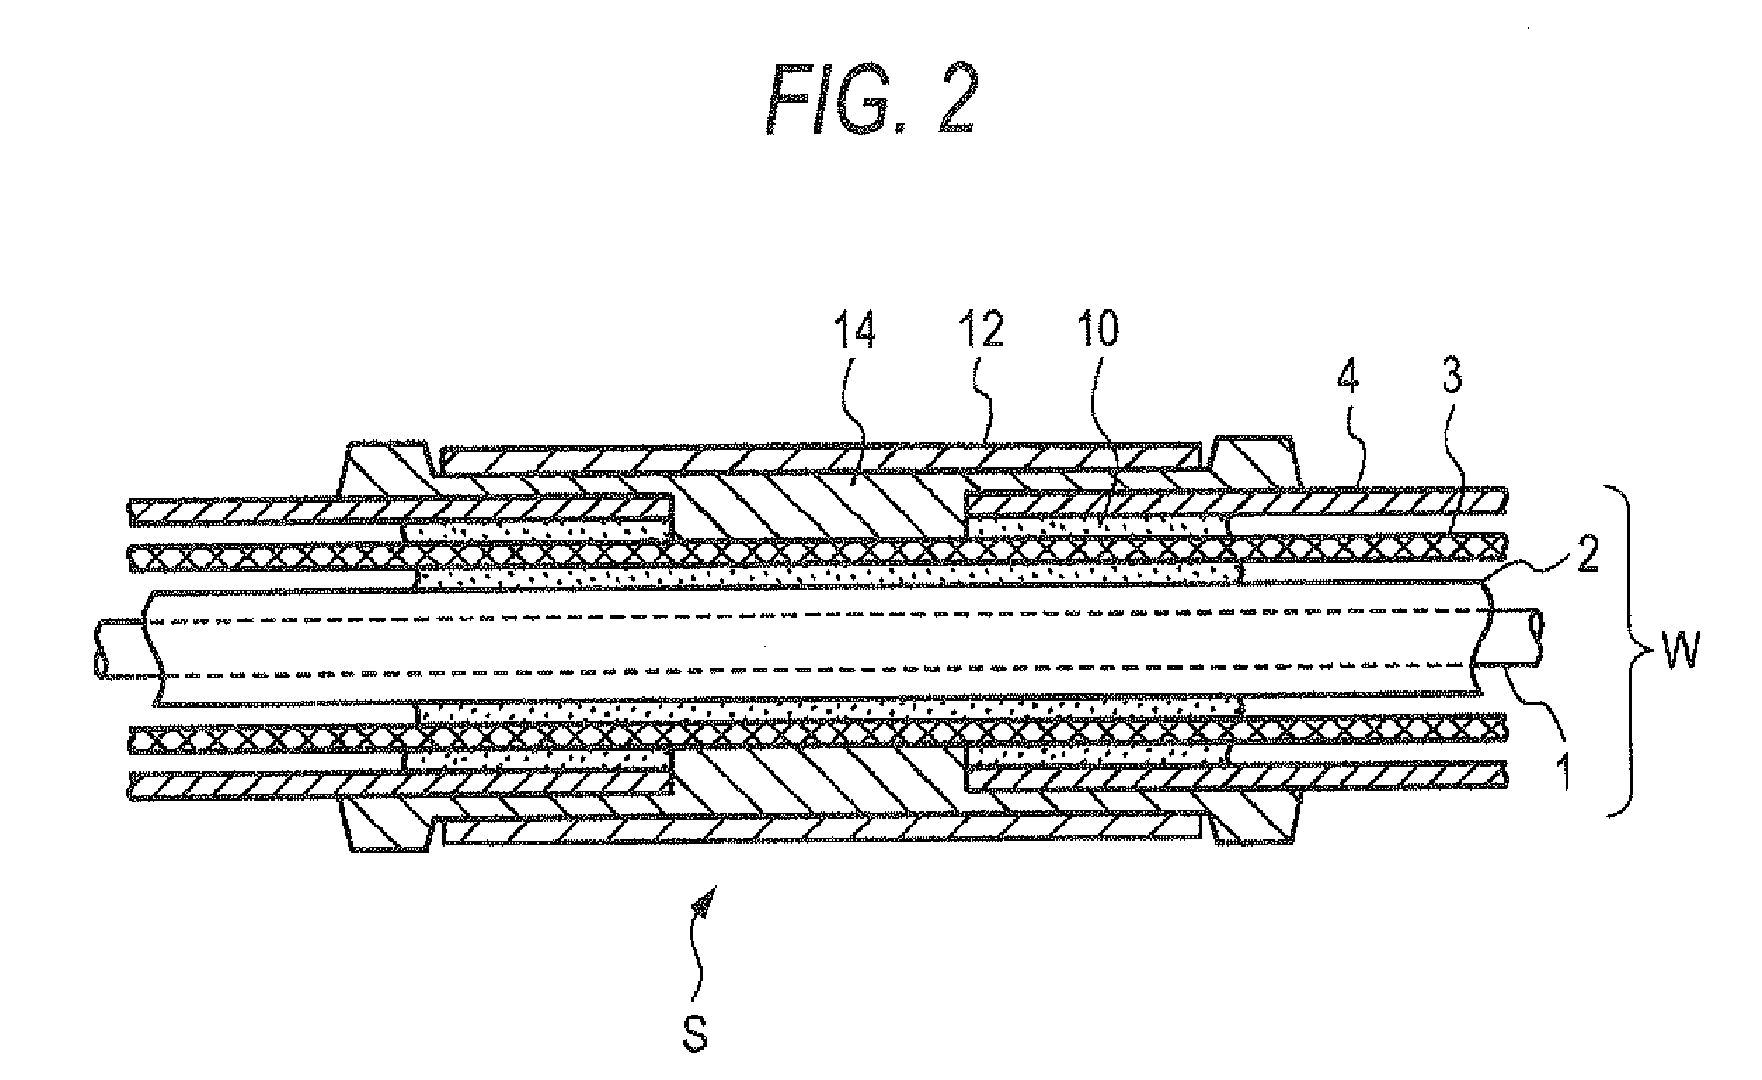 Structure and method for stopping water in shielded electric wire